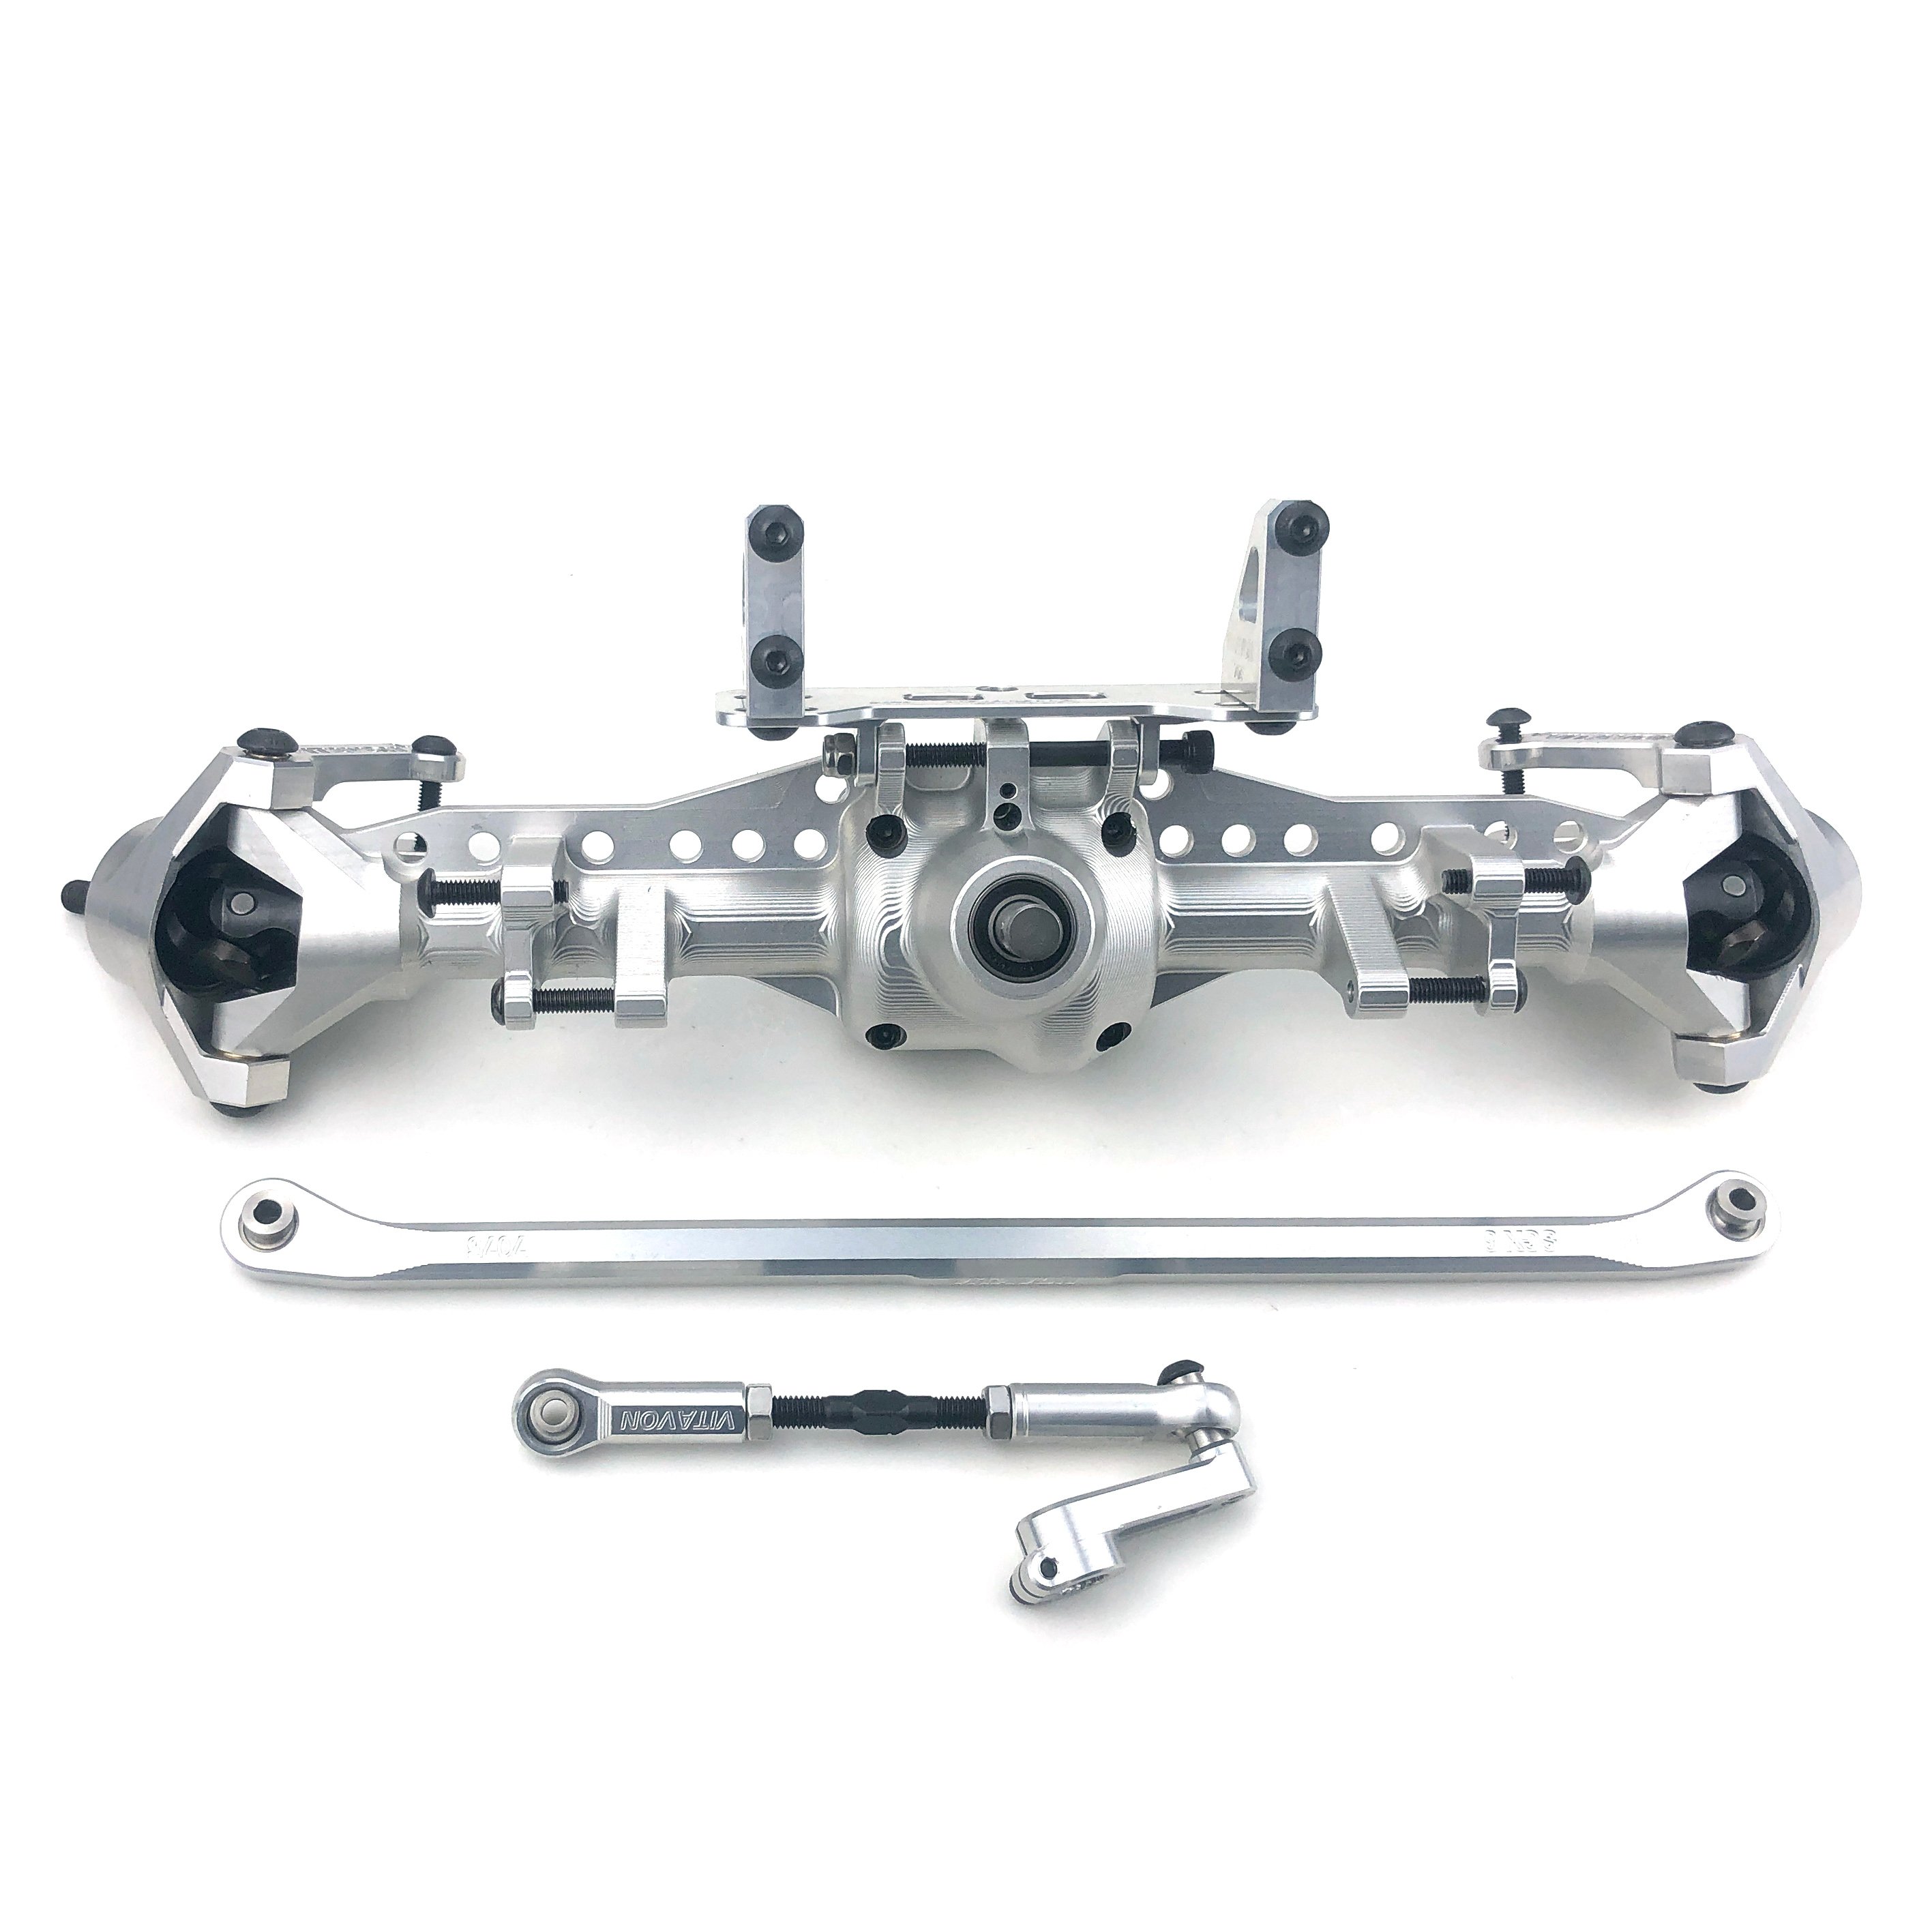 Vitavon CNC 7075 Rear Steering Axle Housing /Front axle housing 4 links built With Internals For SCX6 Jeep Wrangler Trail Honcho 1/6